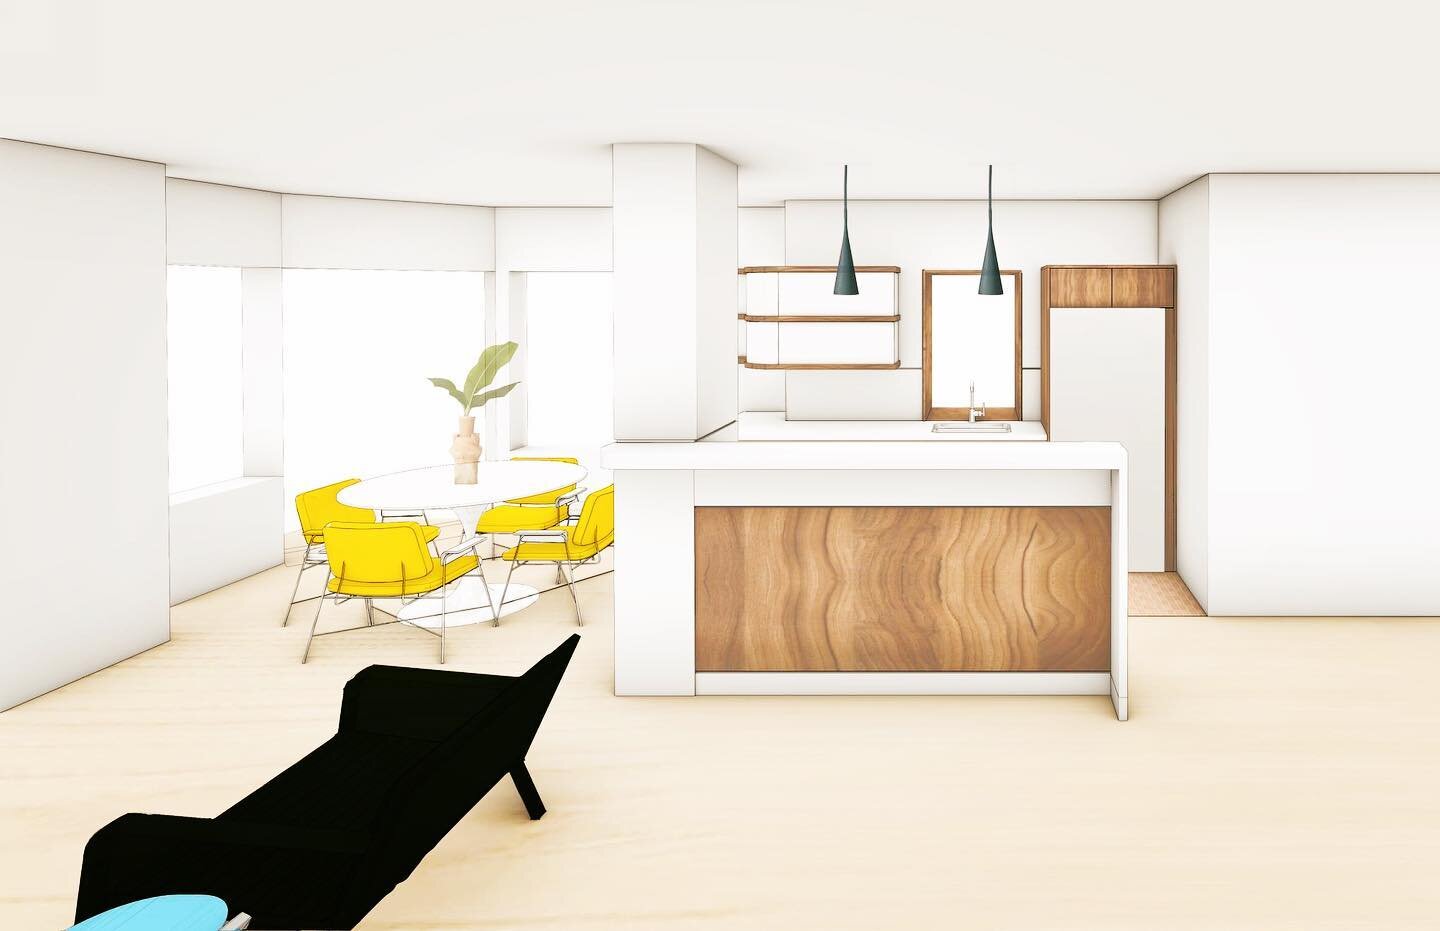 Opening up some things to allow for this new kitchen, welcoming more light and a stronger visual connection between spaces for a family that likes to entertain. 

#renoinspo #architecture #architecturedrawings #architecturelovers #nycarchitecture #re